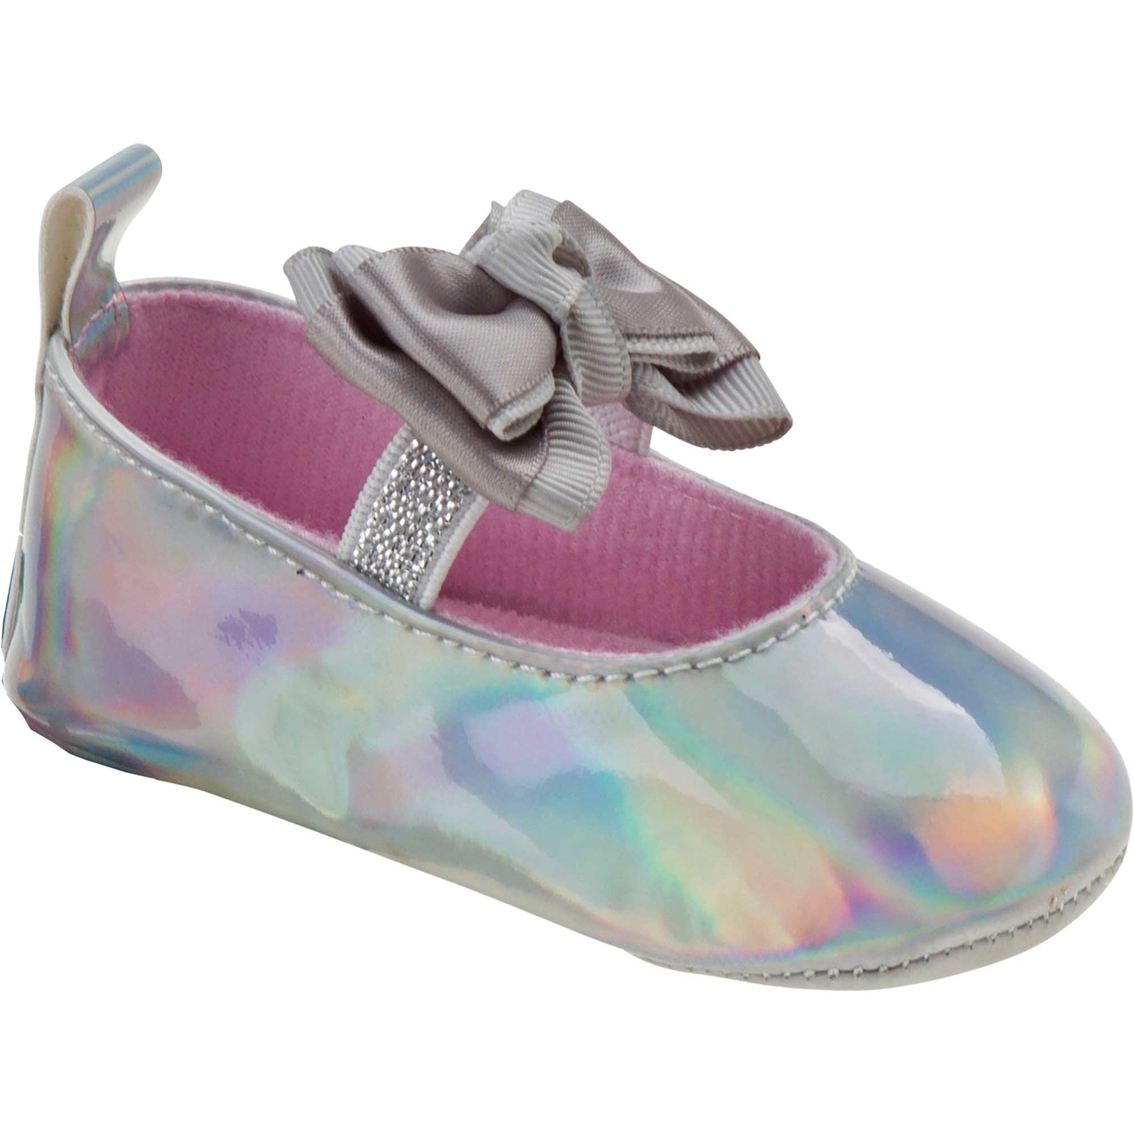 laura ashley shoes for toddlers